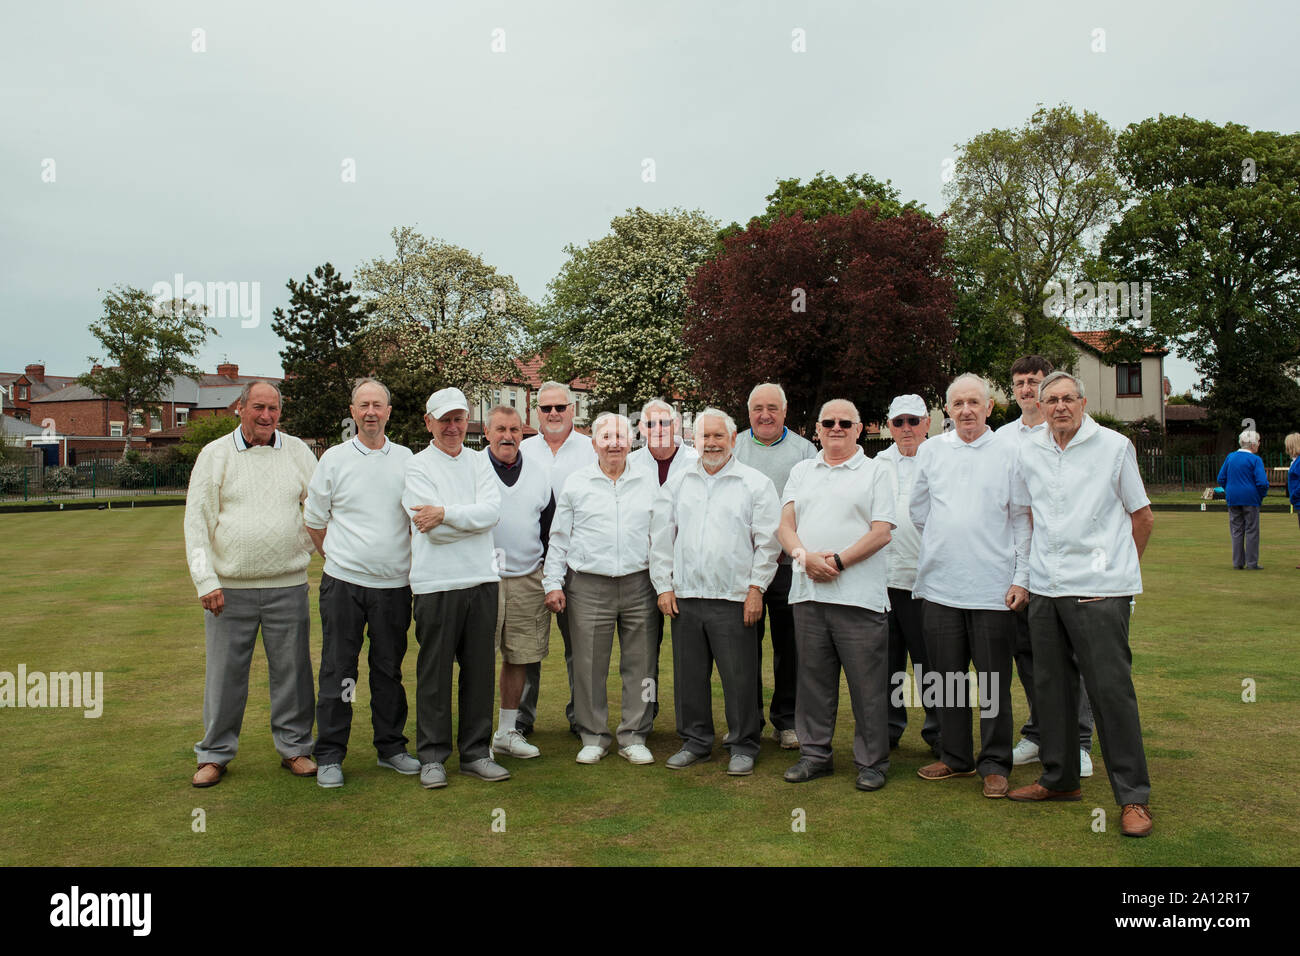 A front view shot of a community of senior men smiling at a bowling green. Stock Photo